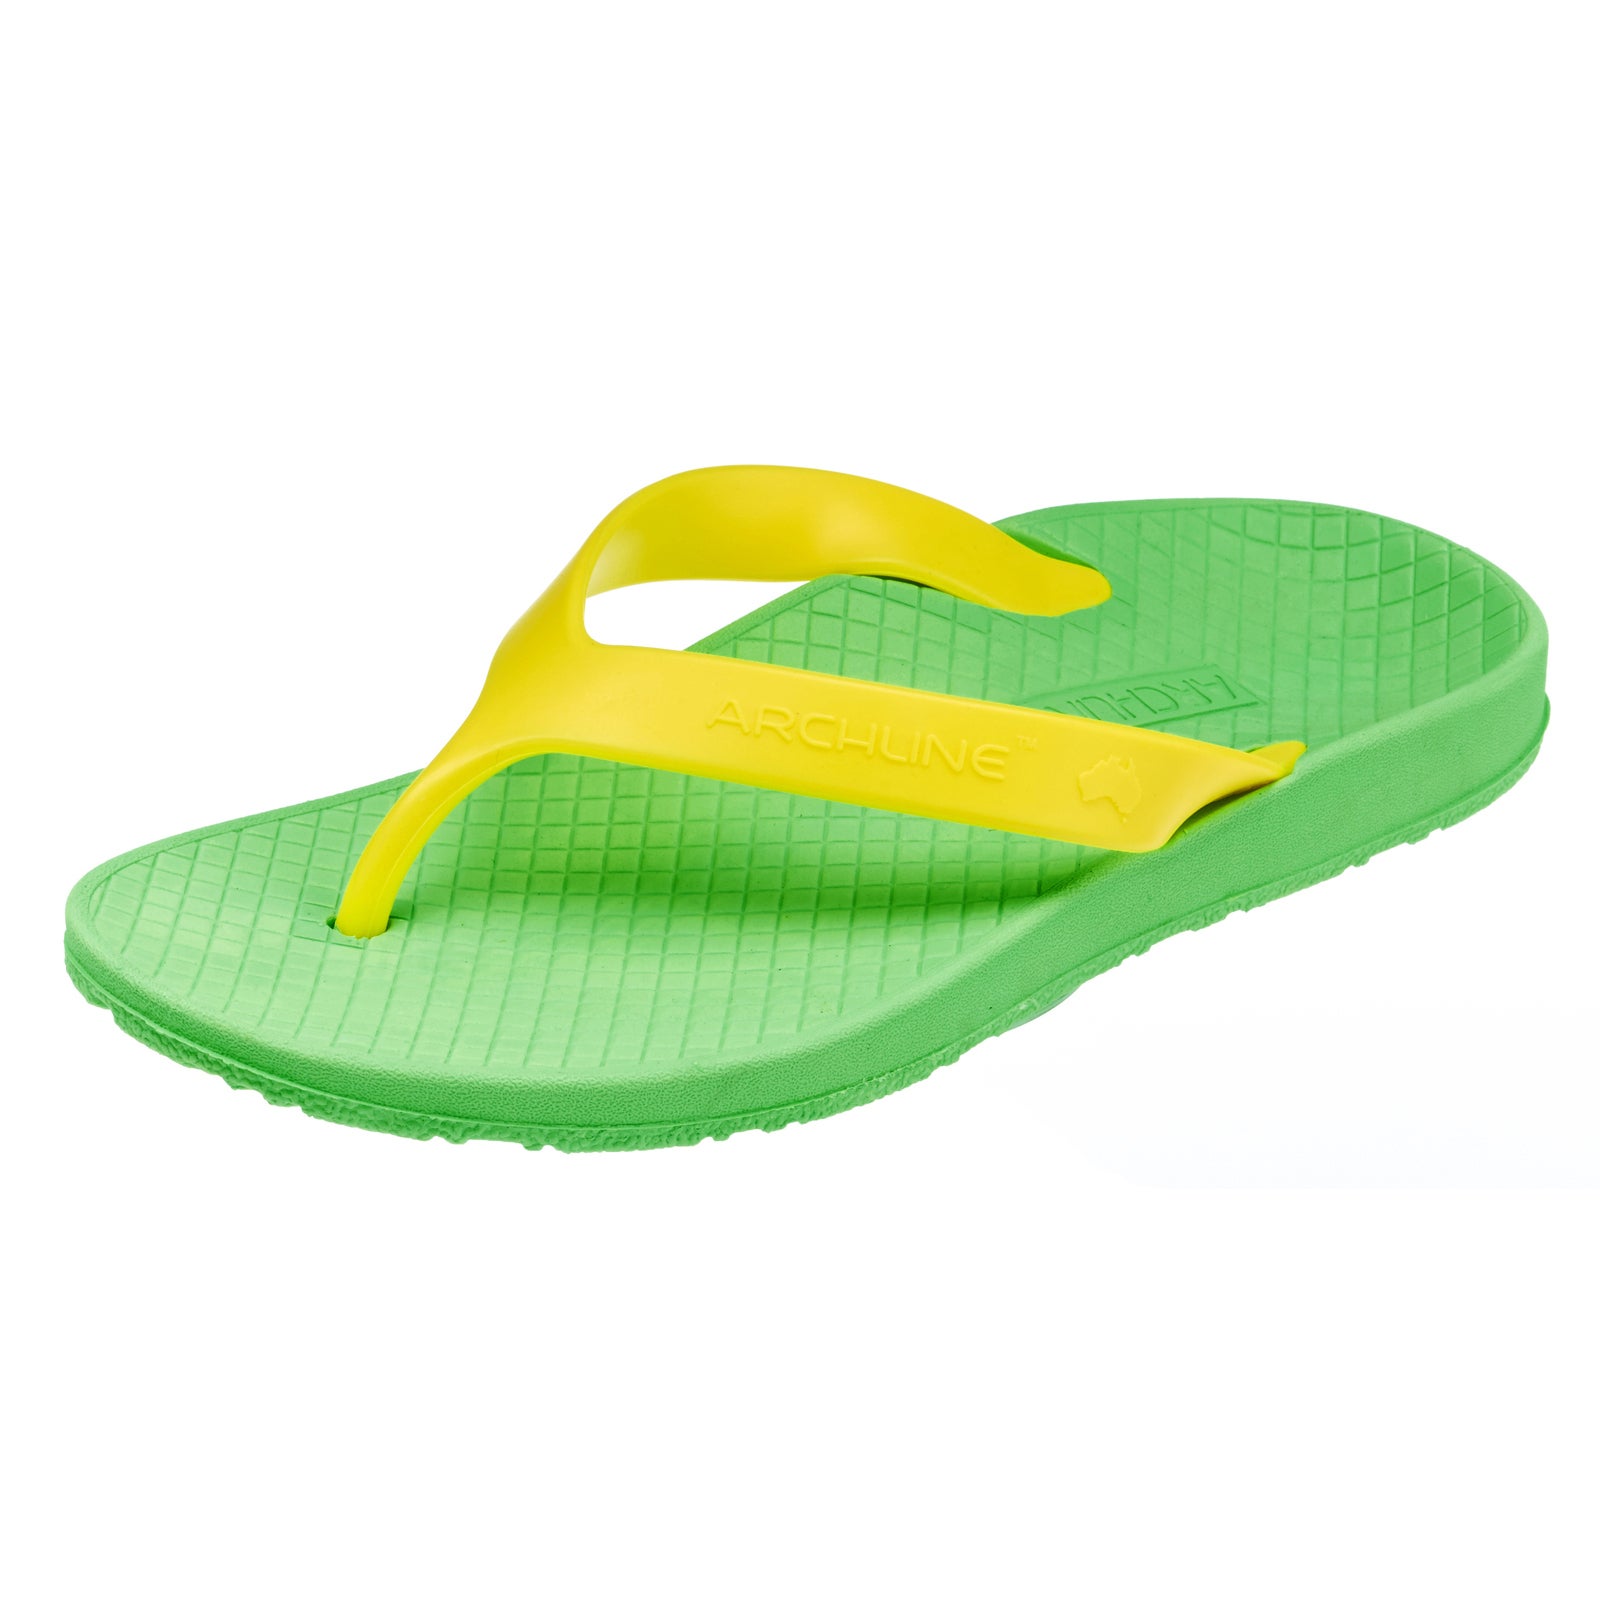 ARCHLINE Flip Flops Orthotic Thongs Arch Support Shoes Footwear